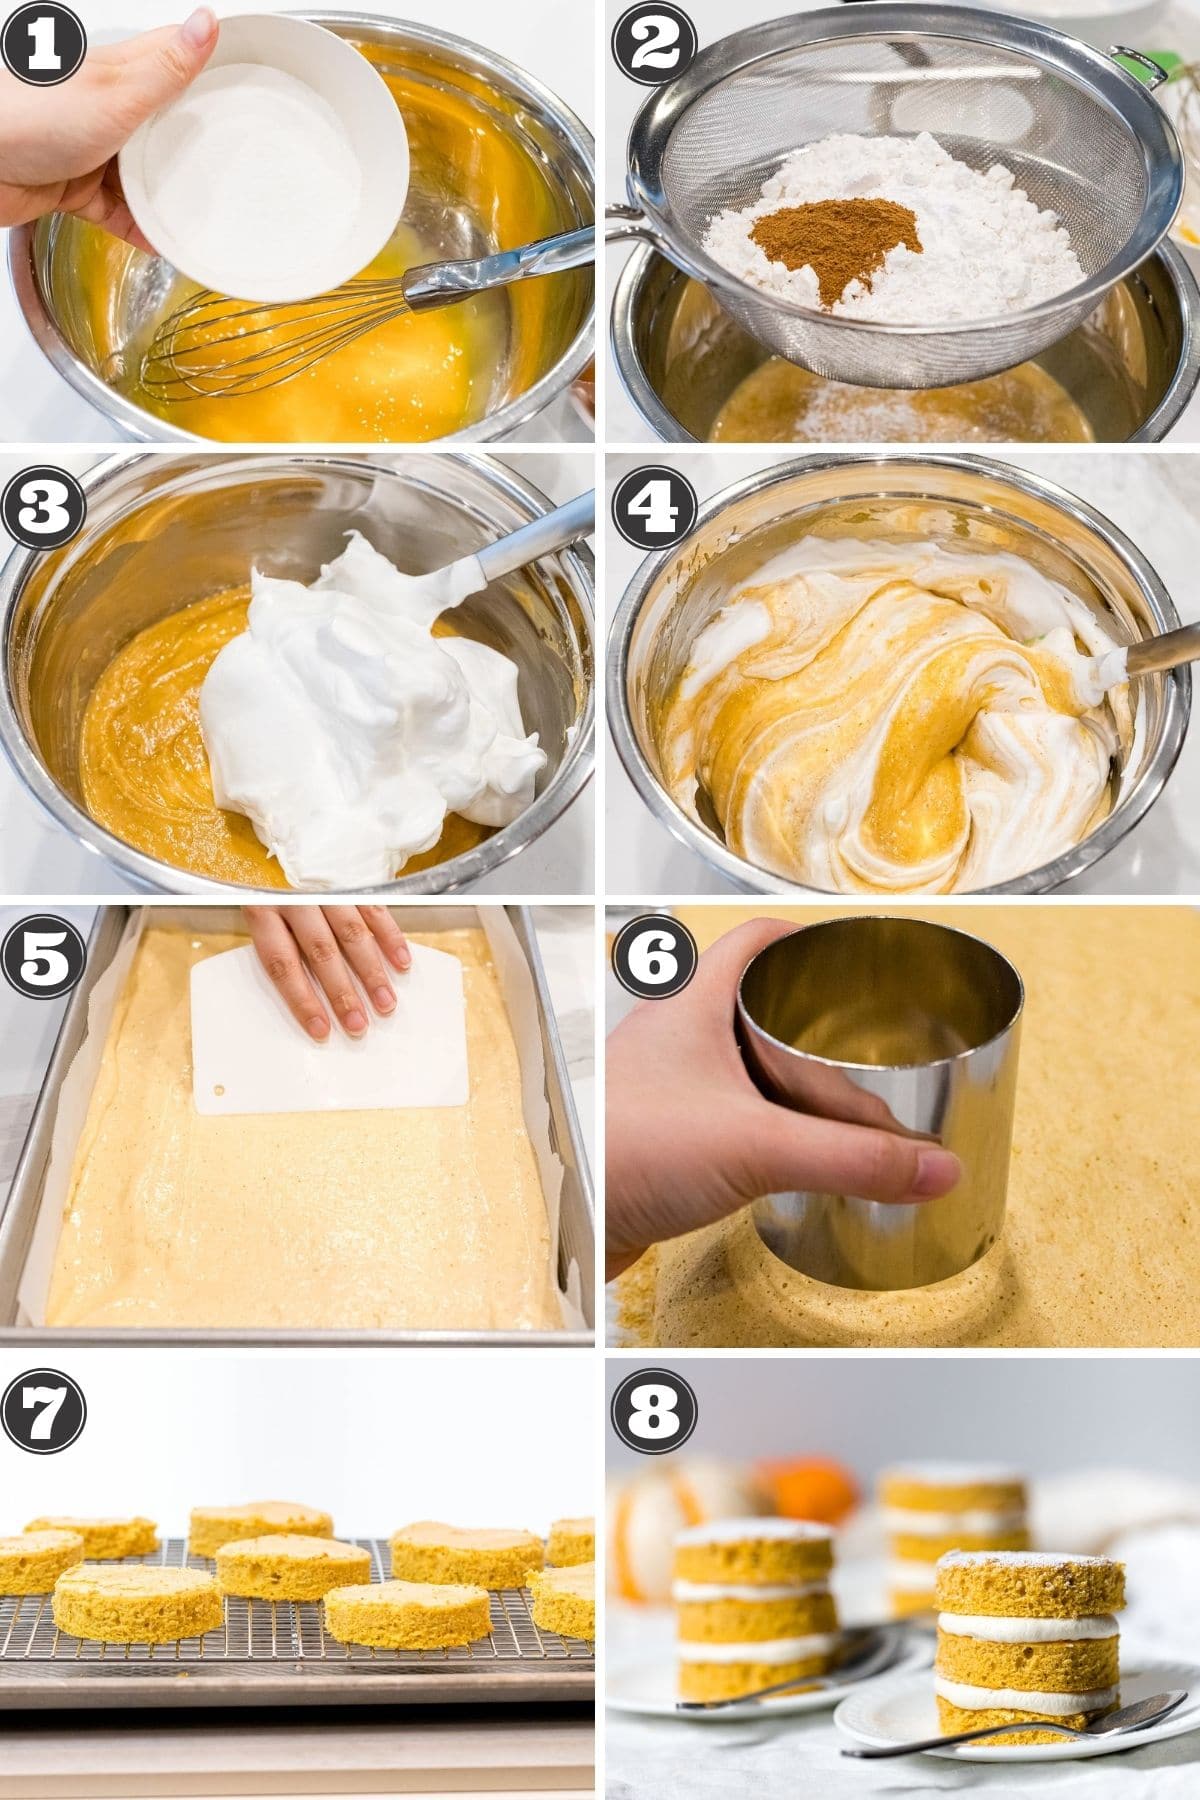 numbered step by step photos for how to make pumpkin layered cakes